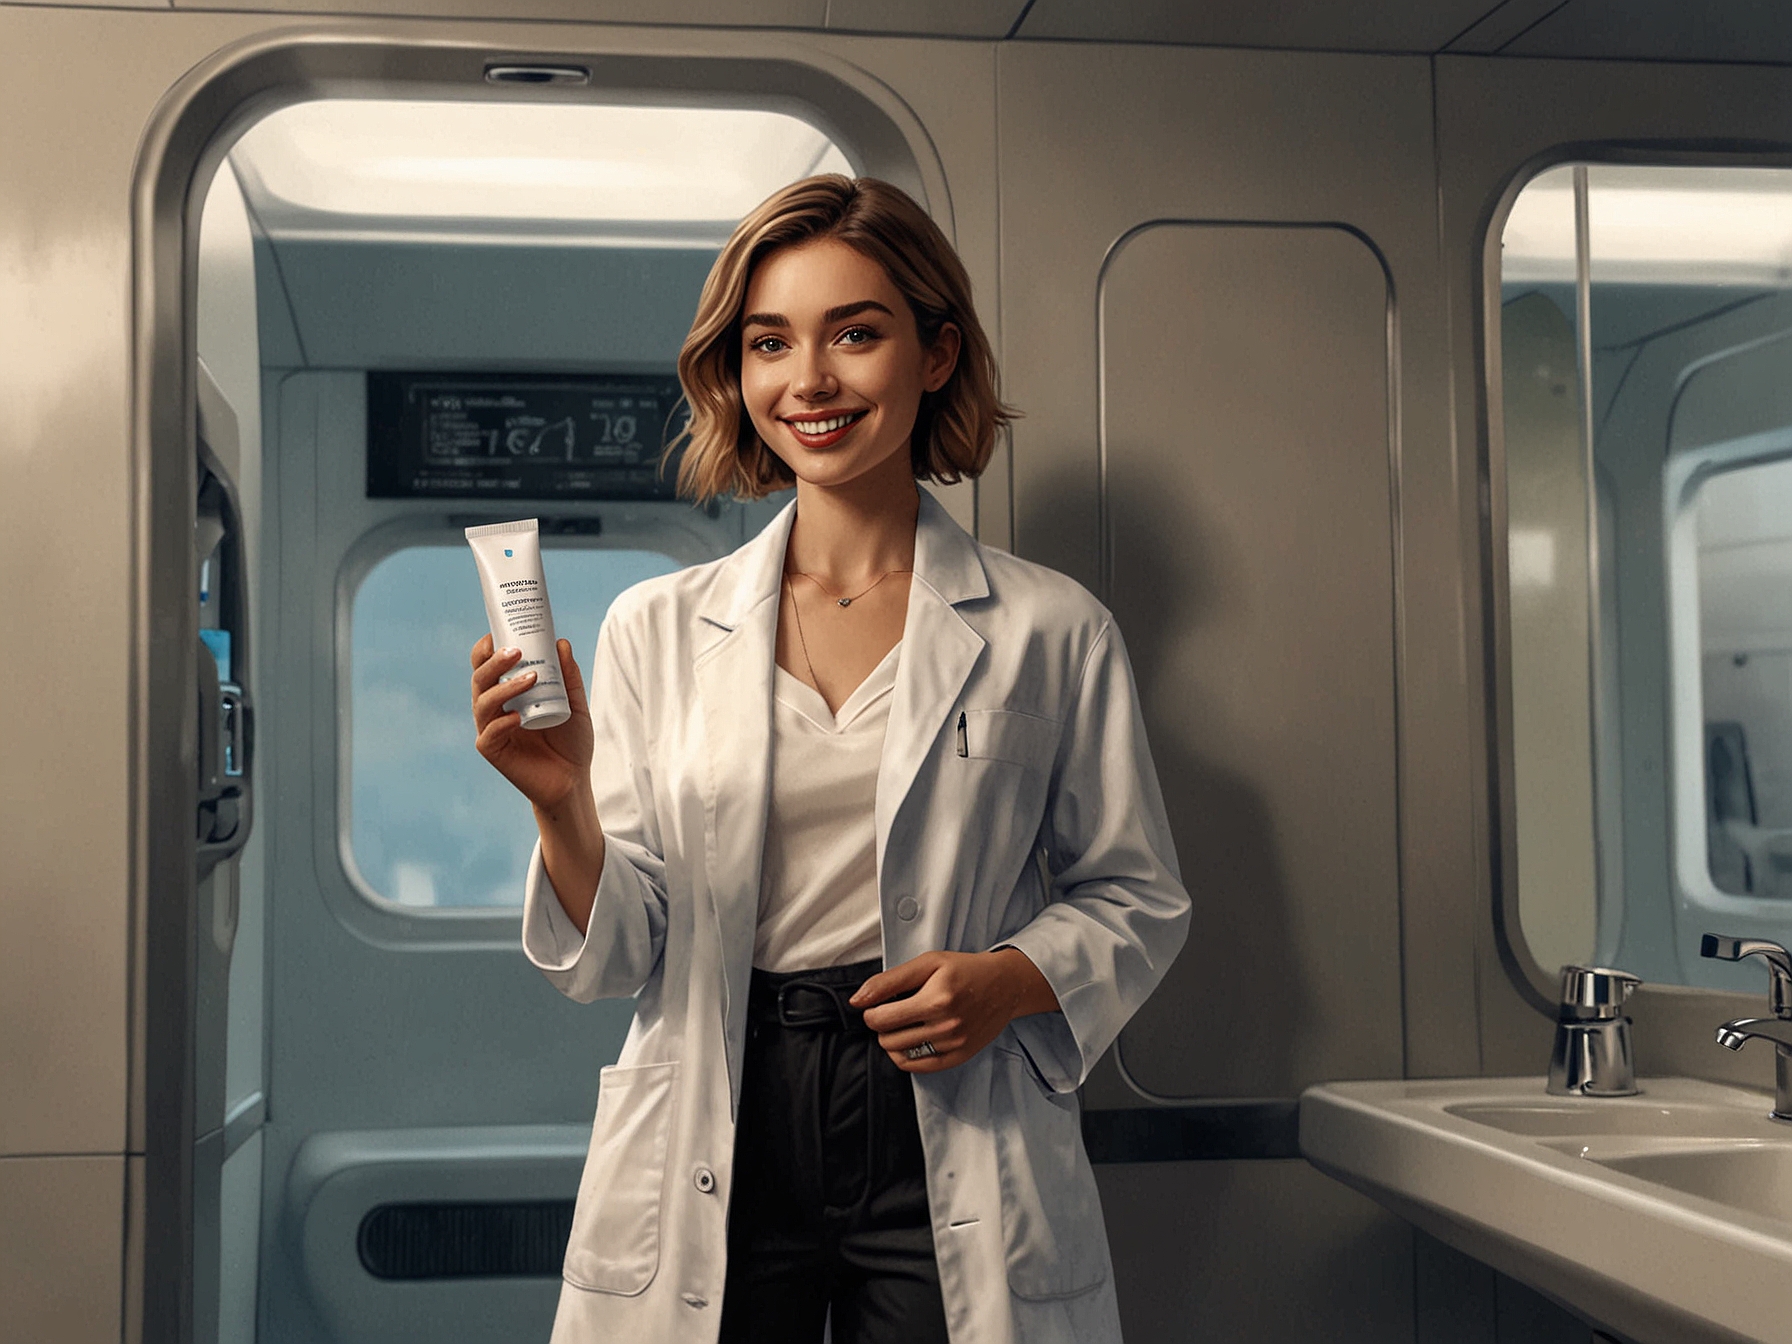 The influencer stands in a plane bathroom, holding a travel-sized cleanser. The cramped space is evident, as she explains the importance of maintaining skincare routines while flying.